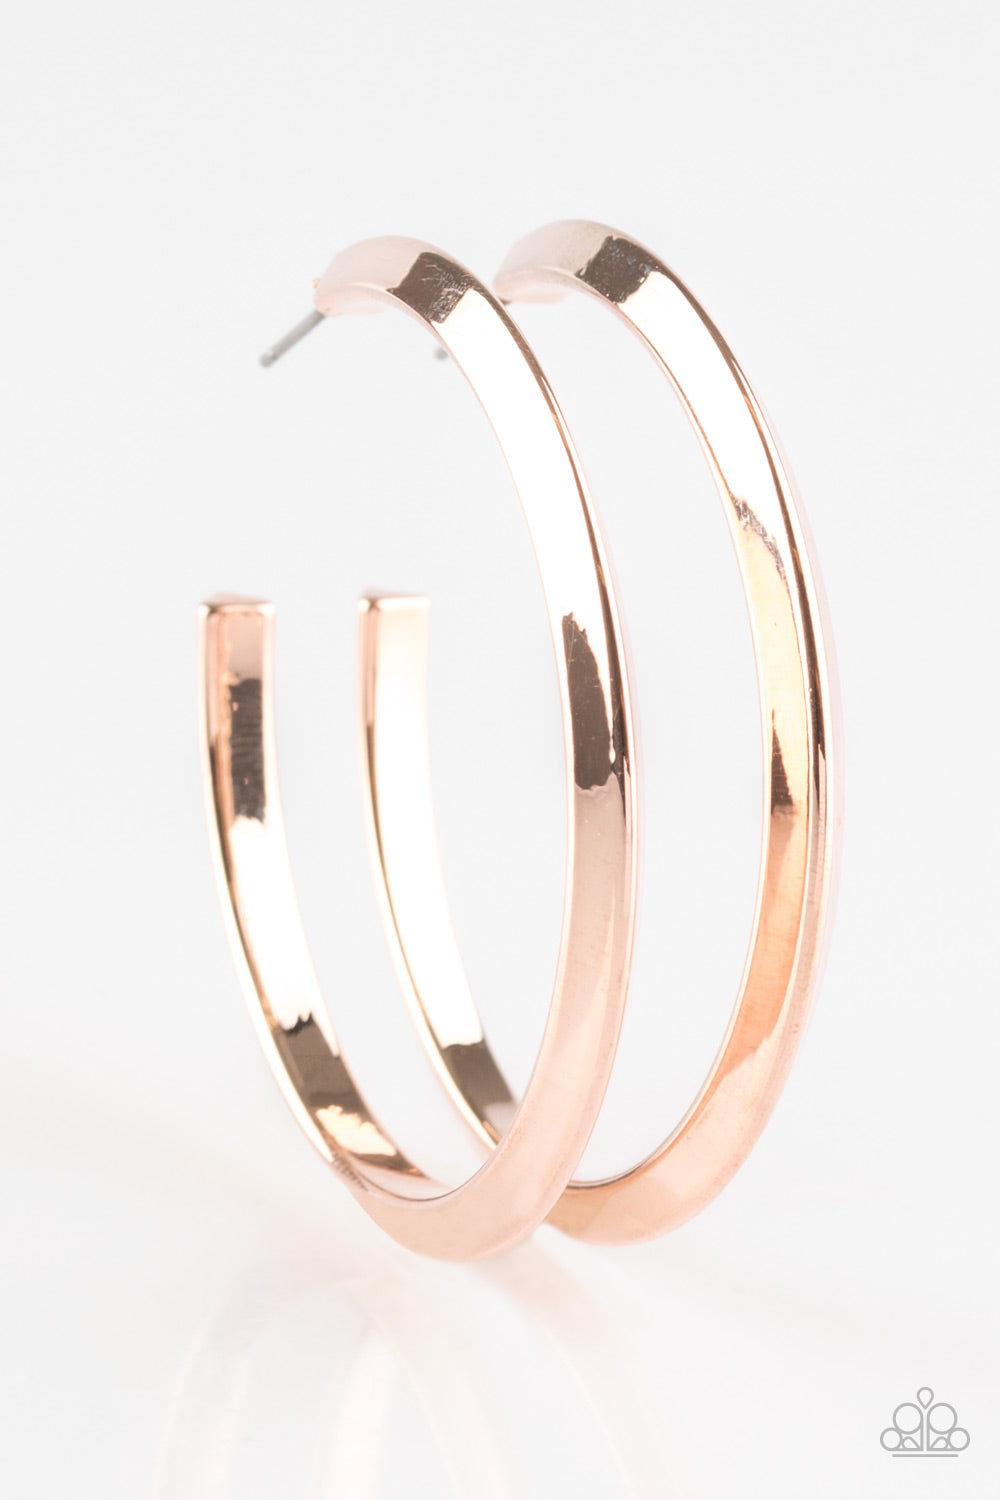 Paparazzi Some Like It HAUTE - Rose Gold Hoop Earrings - A Finishing Touch 